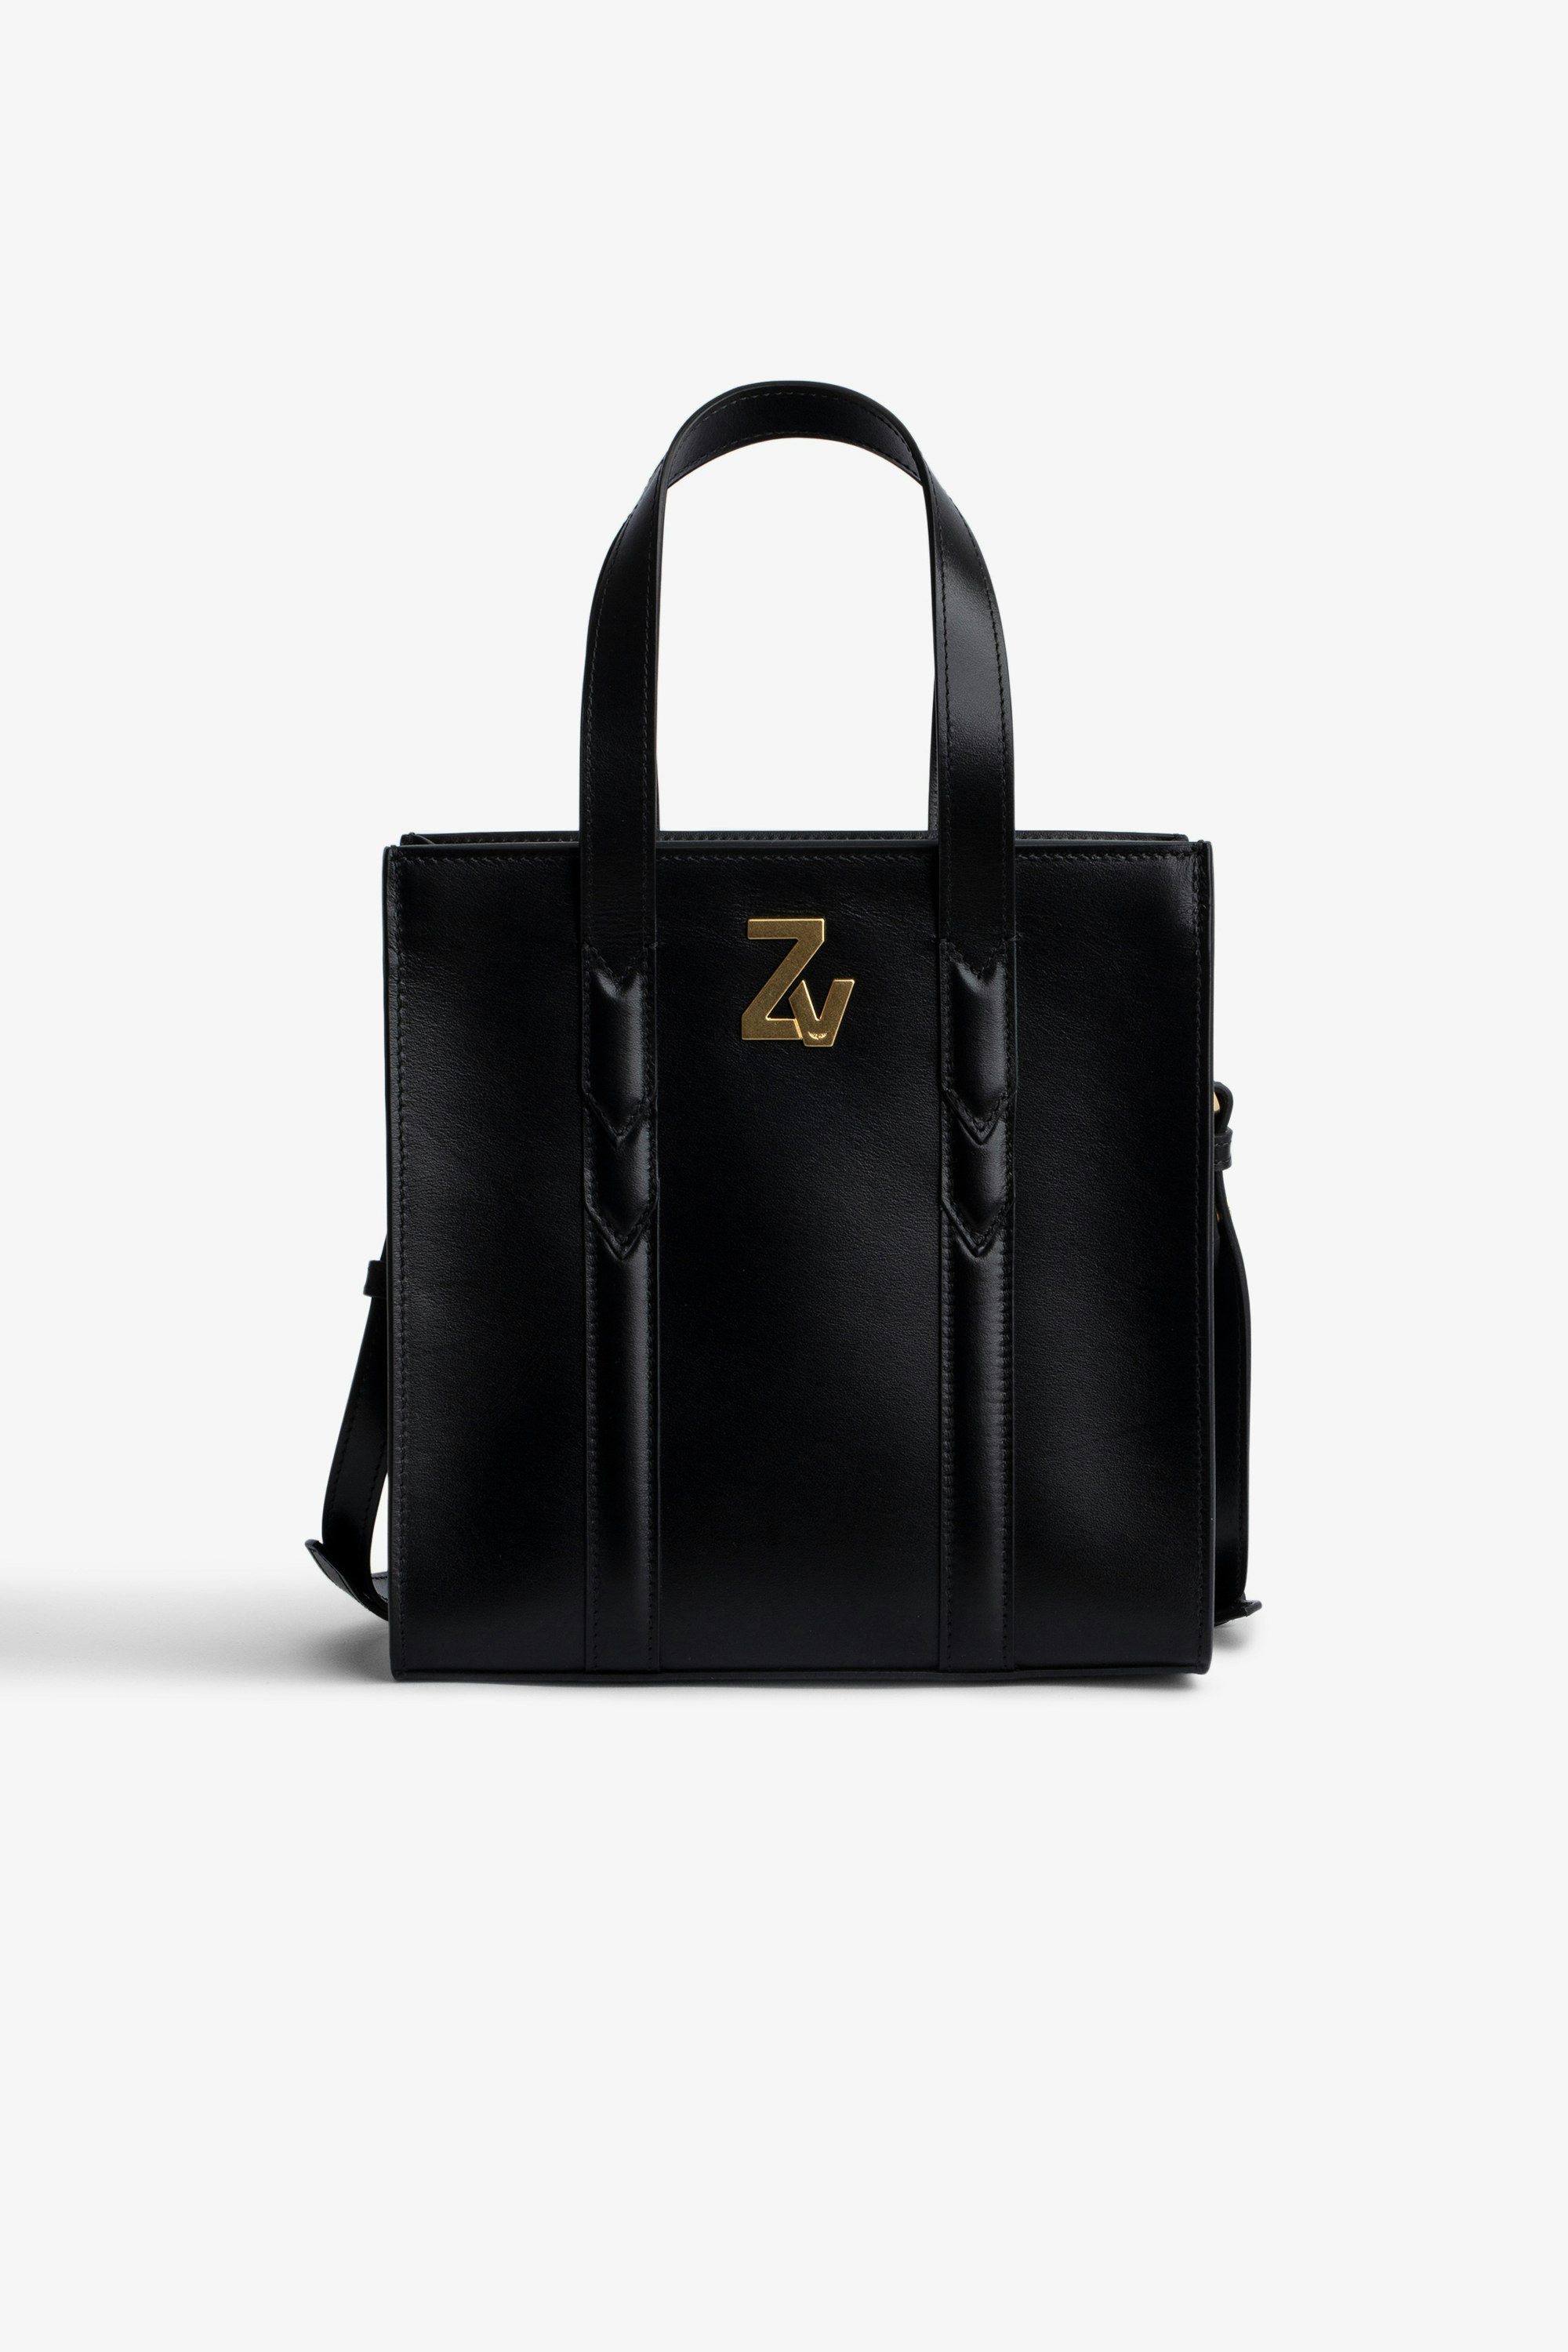 ZV Initiale Le Small Tote バッグ Women’s black ZV Initiale Le Small Tote bag